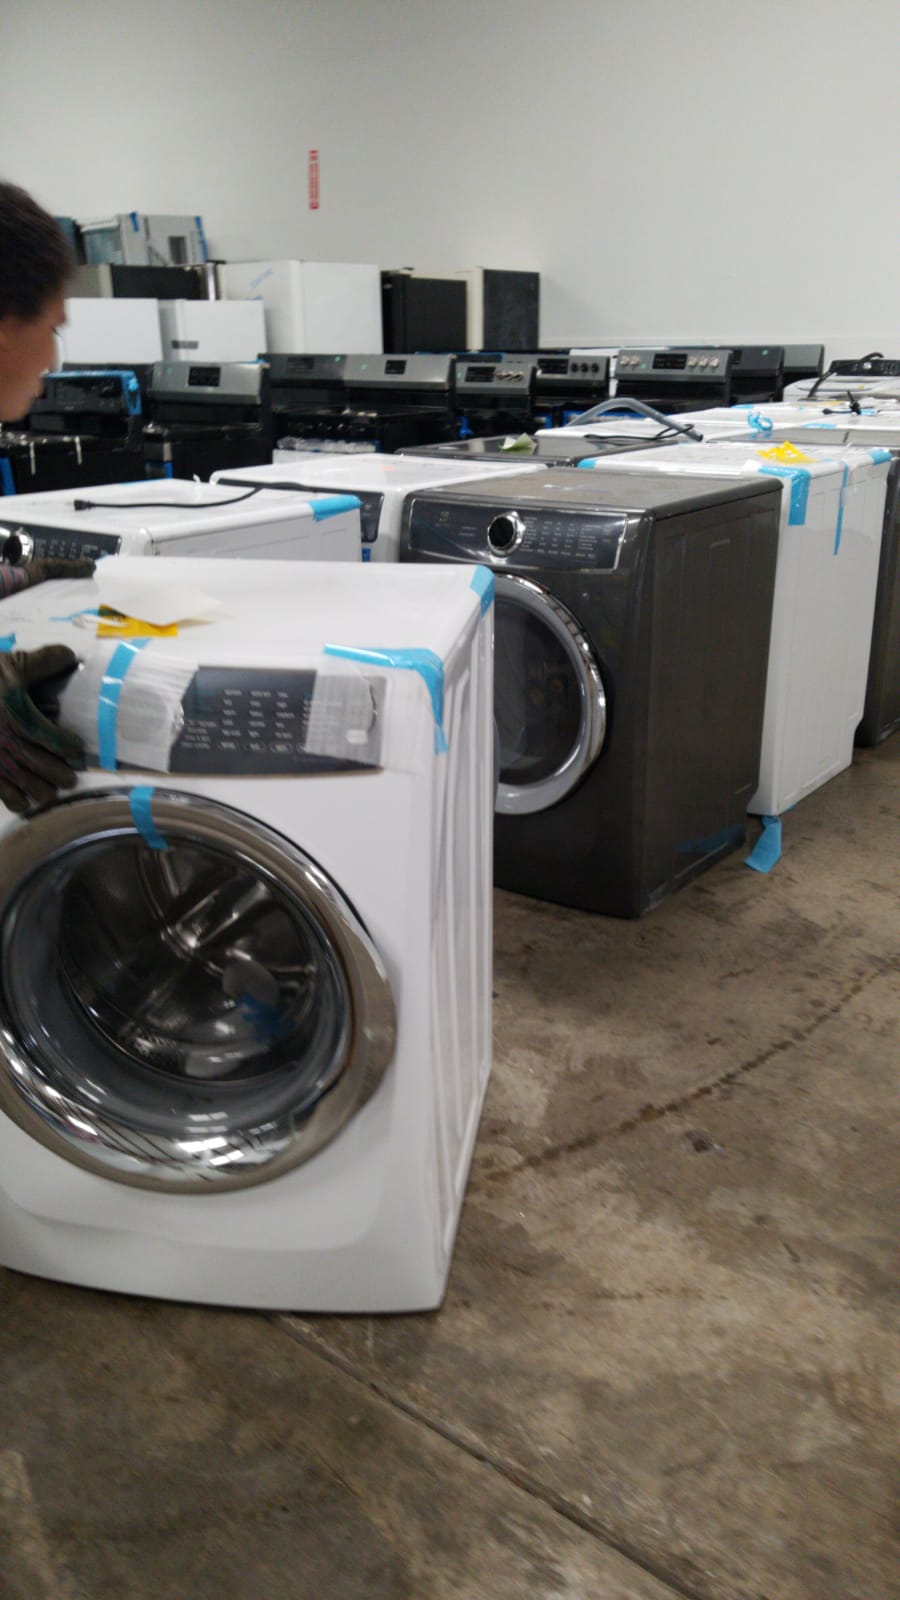 example of Scratch and dent Frigidaire front load washers and dryers are common to see in our wholesale manifests.